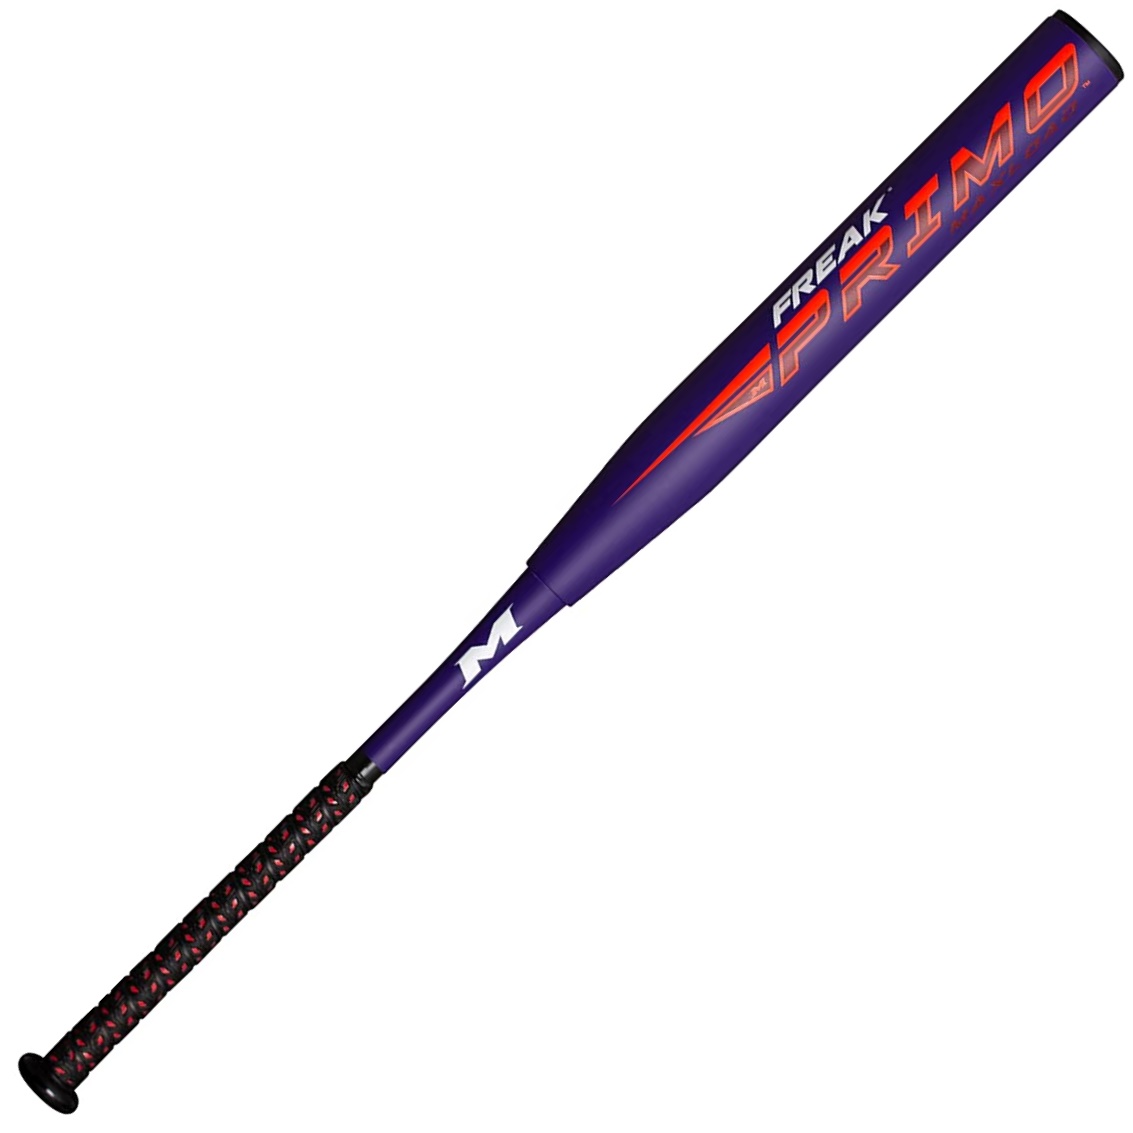 miken-2022-freak-primo-maxload-usssa-slowpitch-softball-bat-14-barrel-34-inch-25-oz MP22MU-3-25 Miken  <h1 id=title class=a-size-large a-spacing-none><span id=productTitle class=a-size-large product-title-word-break>Miken Freak Primo Maxload USSSA